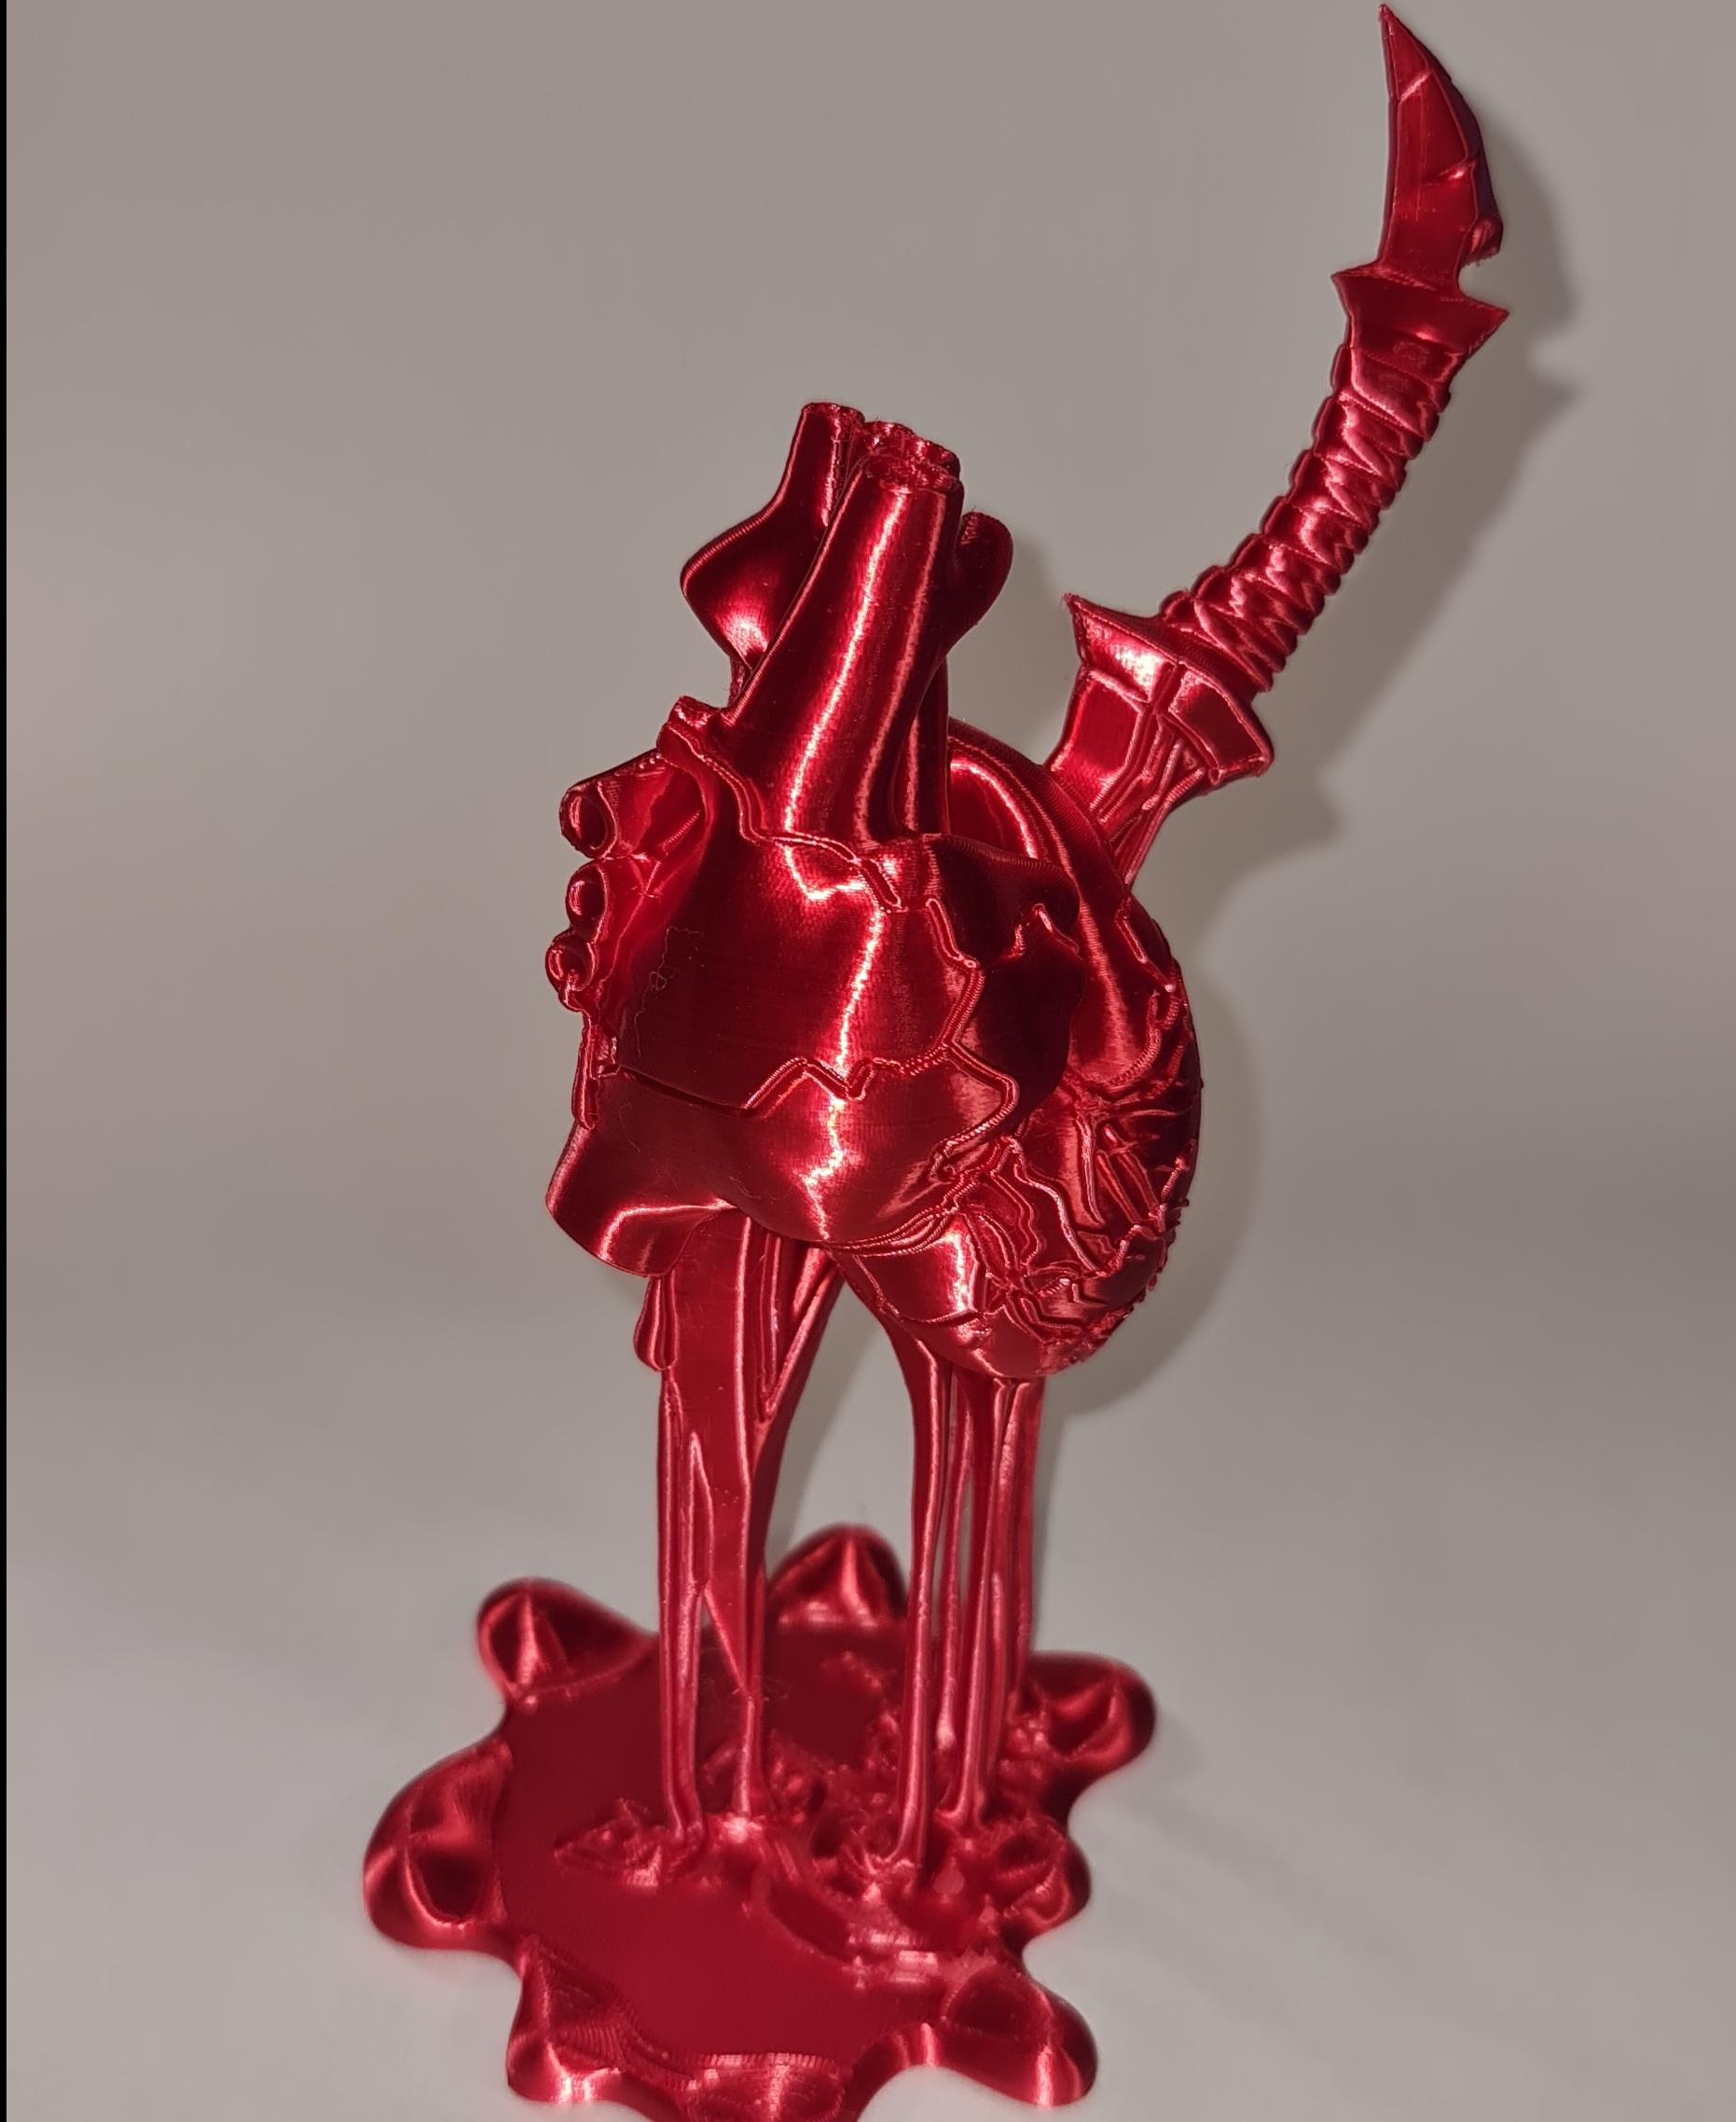 Tortured Heart (Pre-Supported) - Original Polyalchemy Elixir Royal Ruby filament. Printed with organic supports, initial attempt without failed! - 3d model